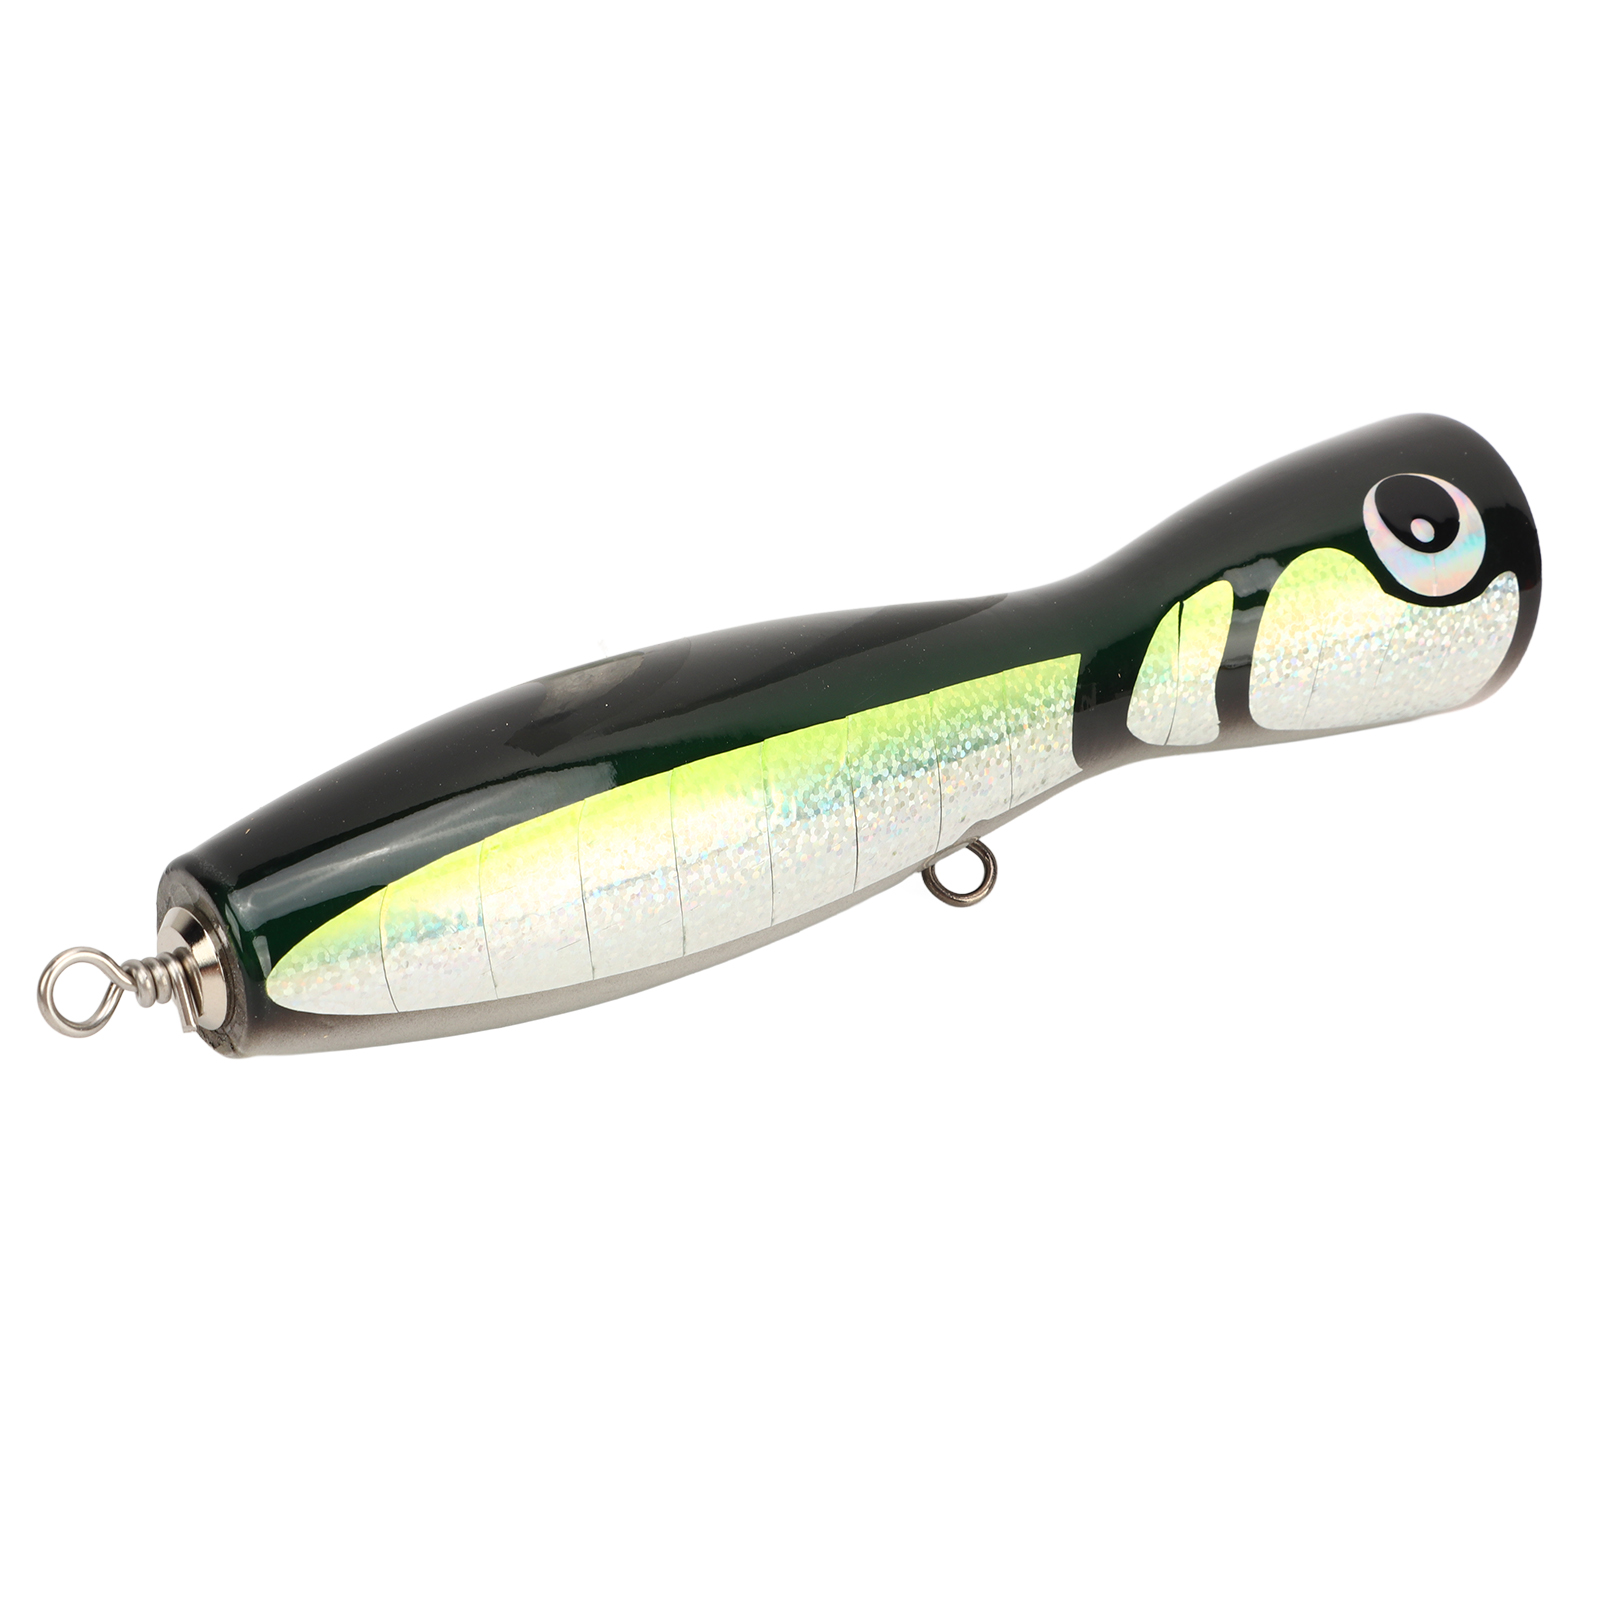 Saltwater Fishing Lures Linden Fishing Lures Strong Reflective for